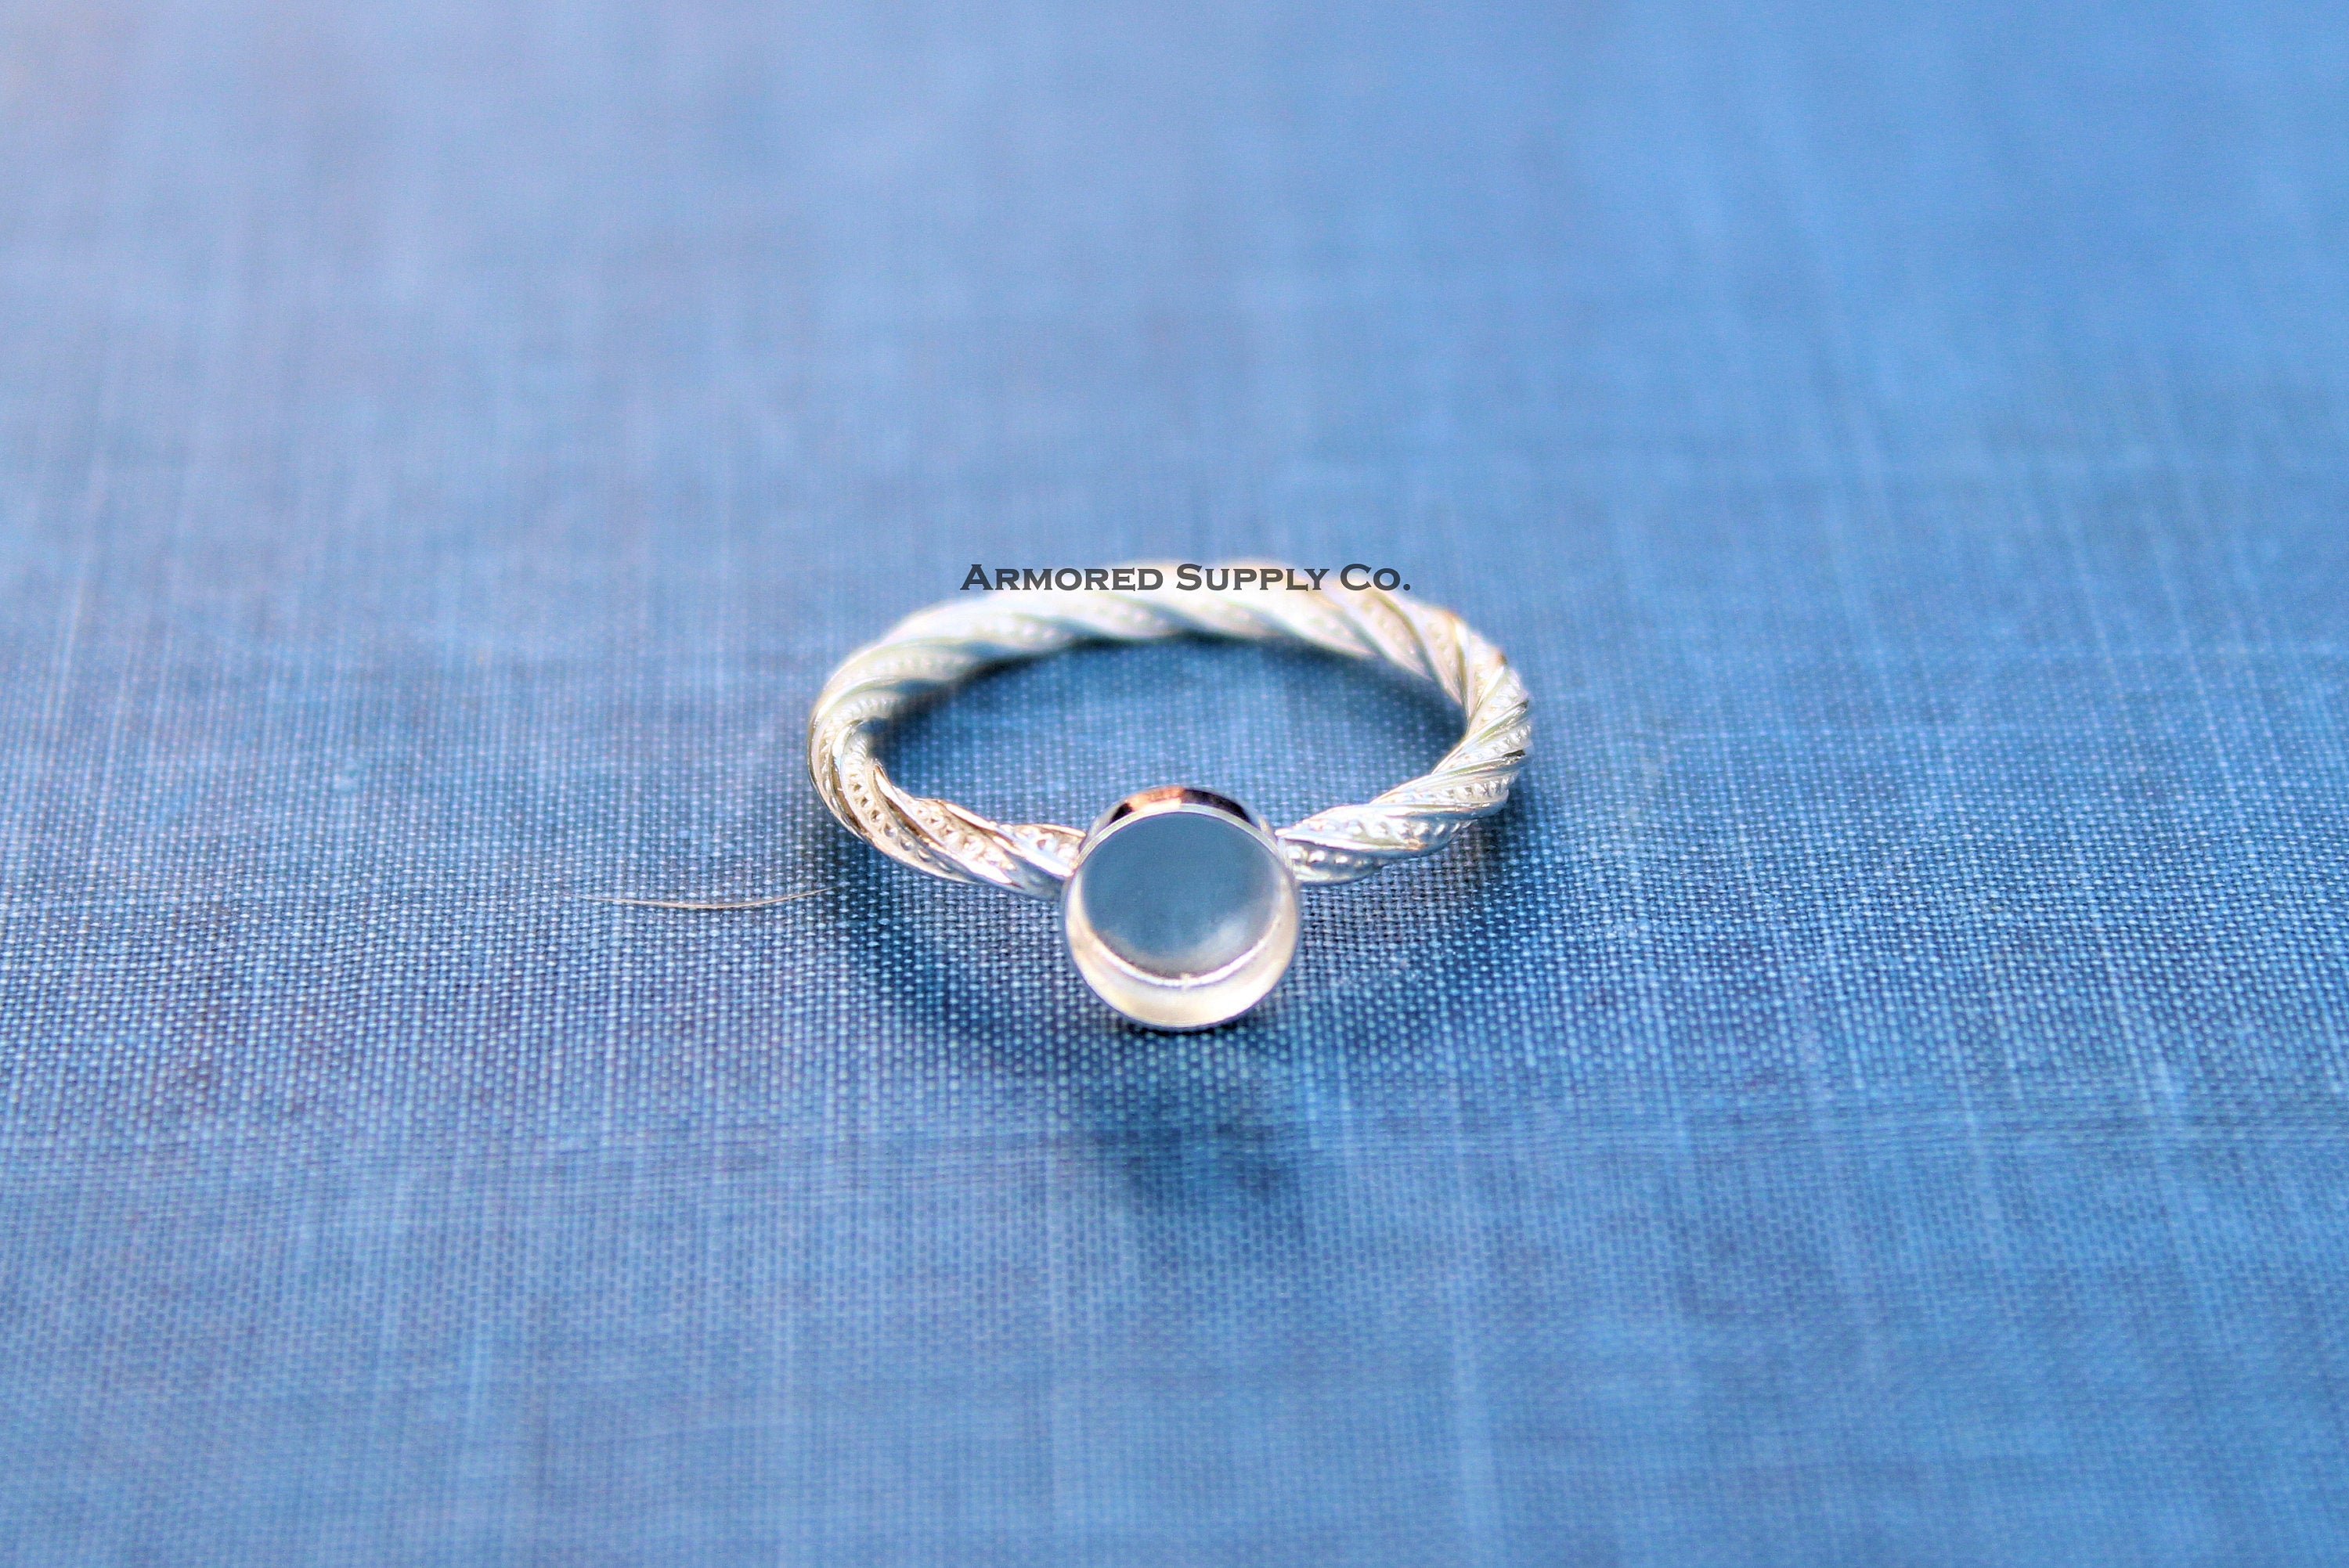 Sterling Silver Round Bezel Cup Dotted Ring blank, Heart Cabochon, Cab Pad Breast Milk, jewelry supplies, build your ring, wholesale jewelry